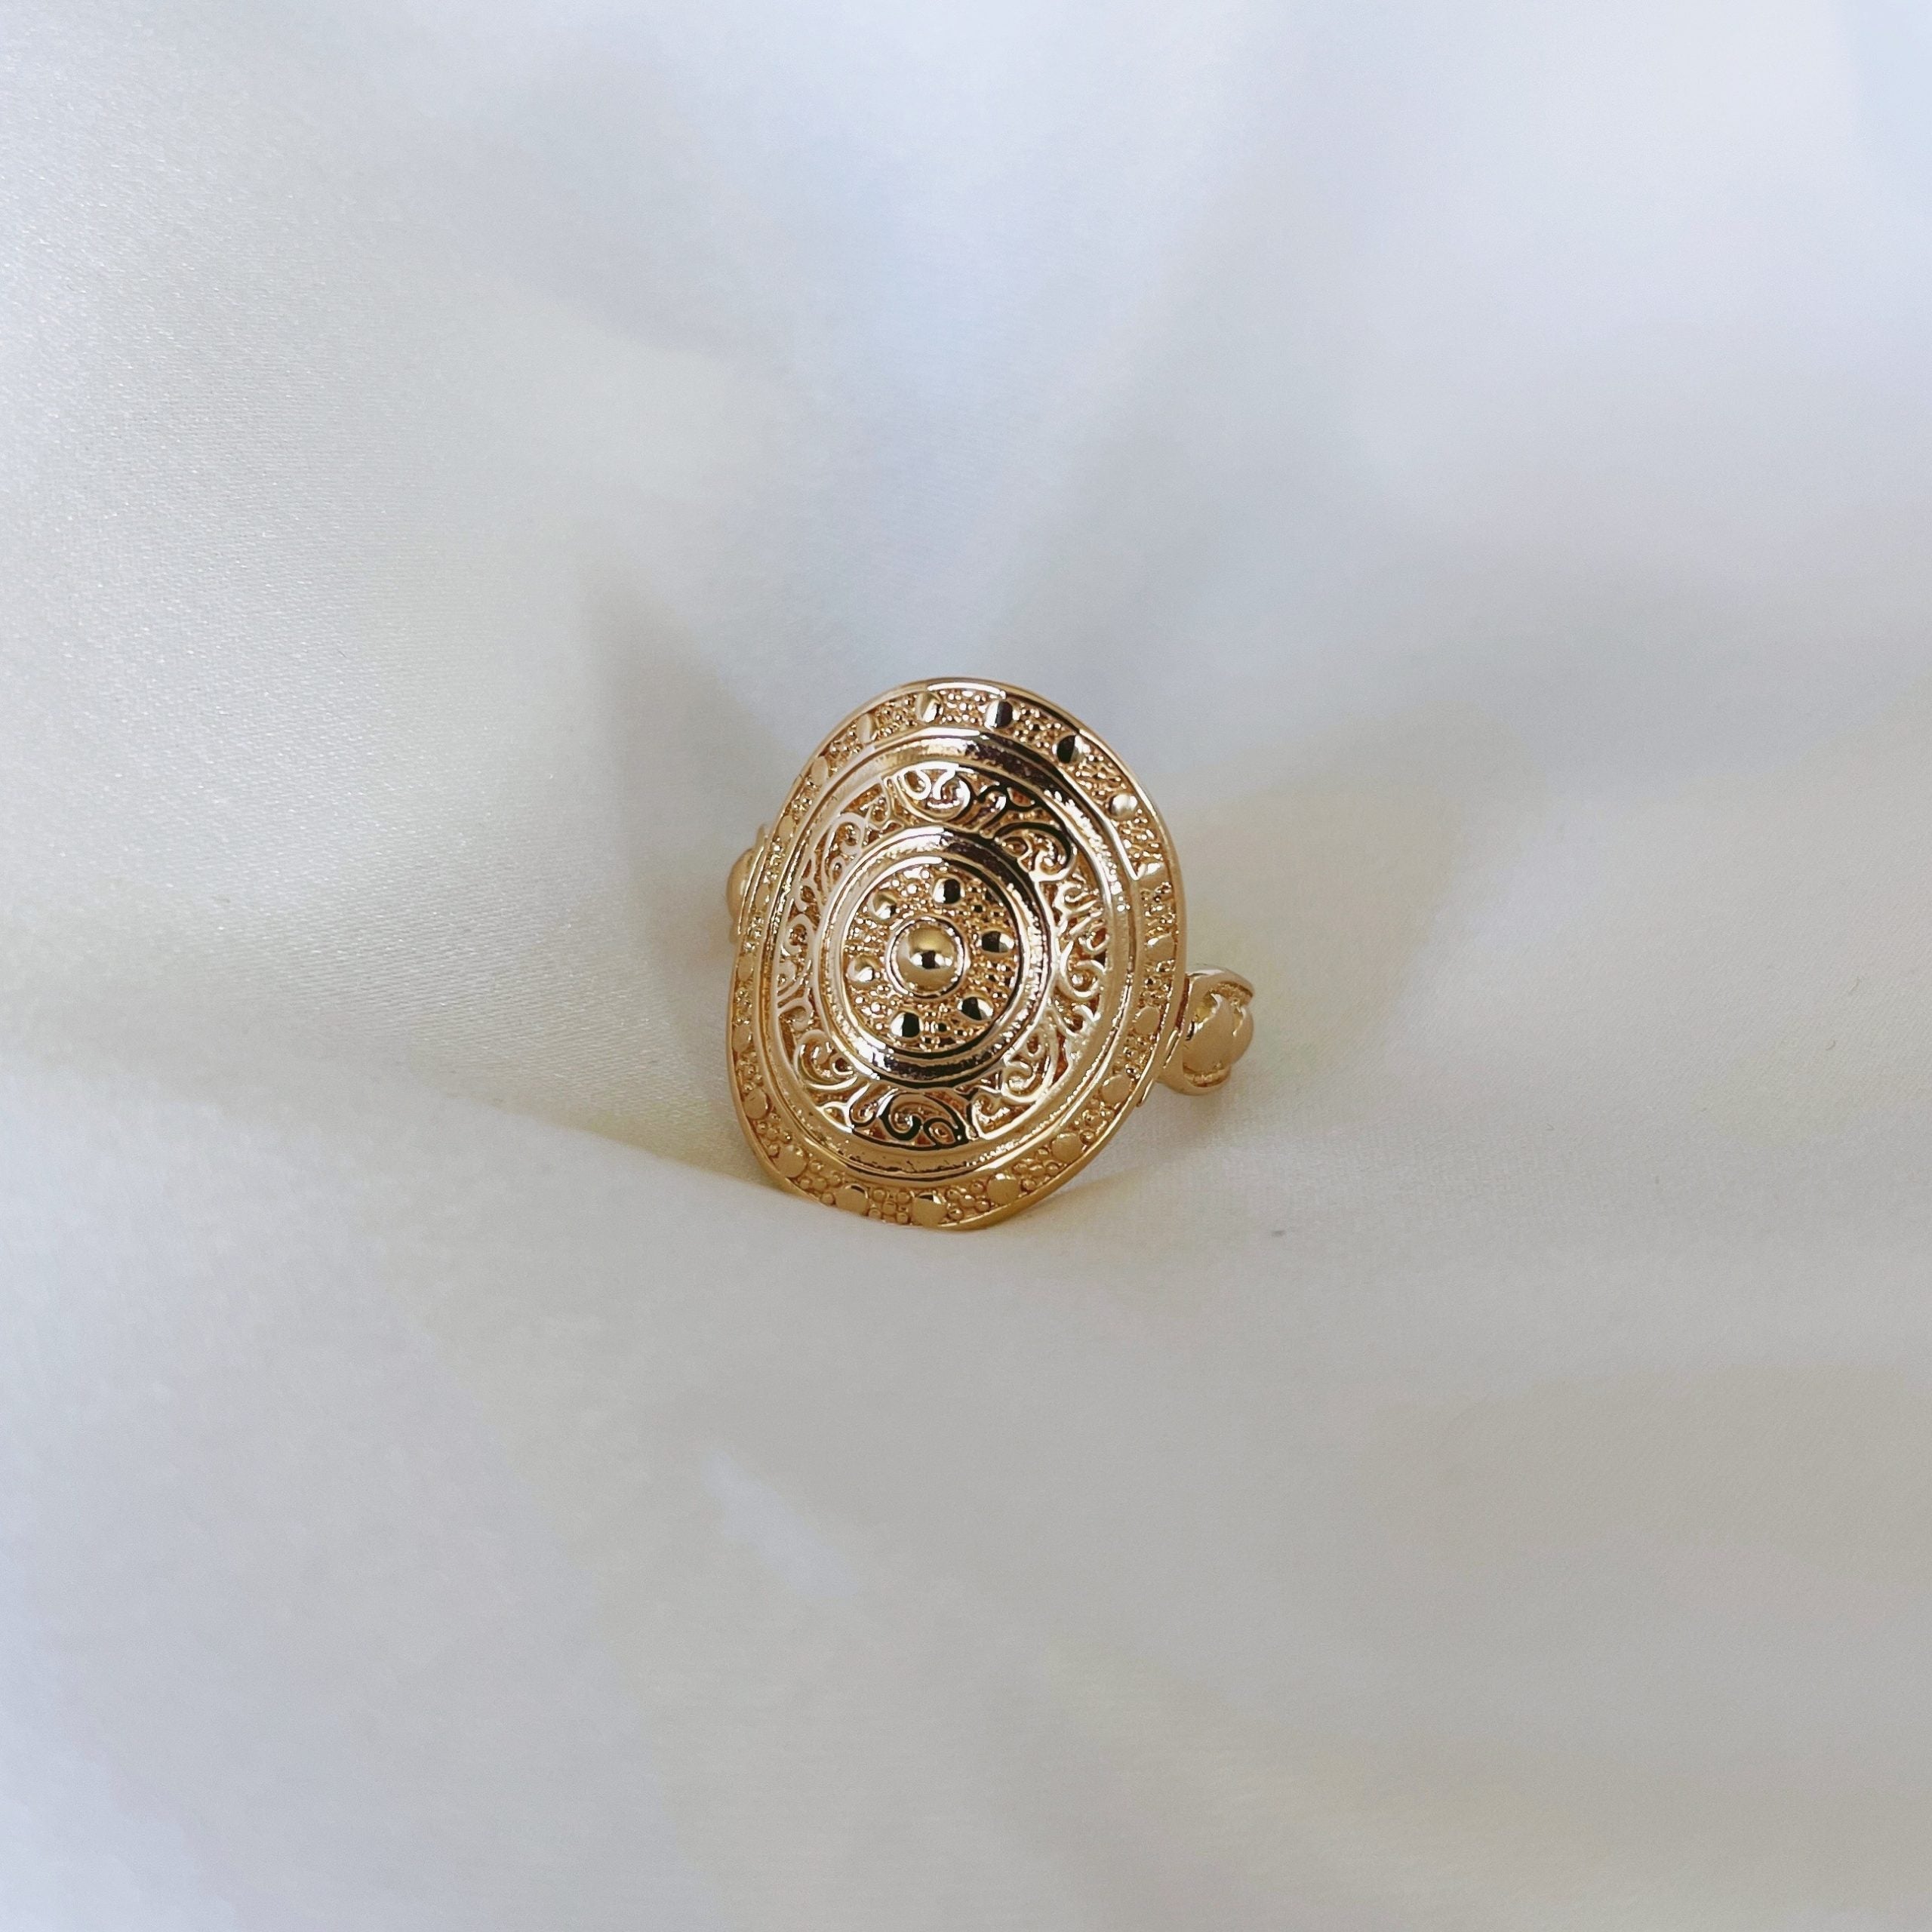 Gold-plated “Medal” ring